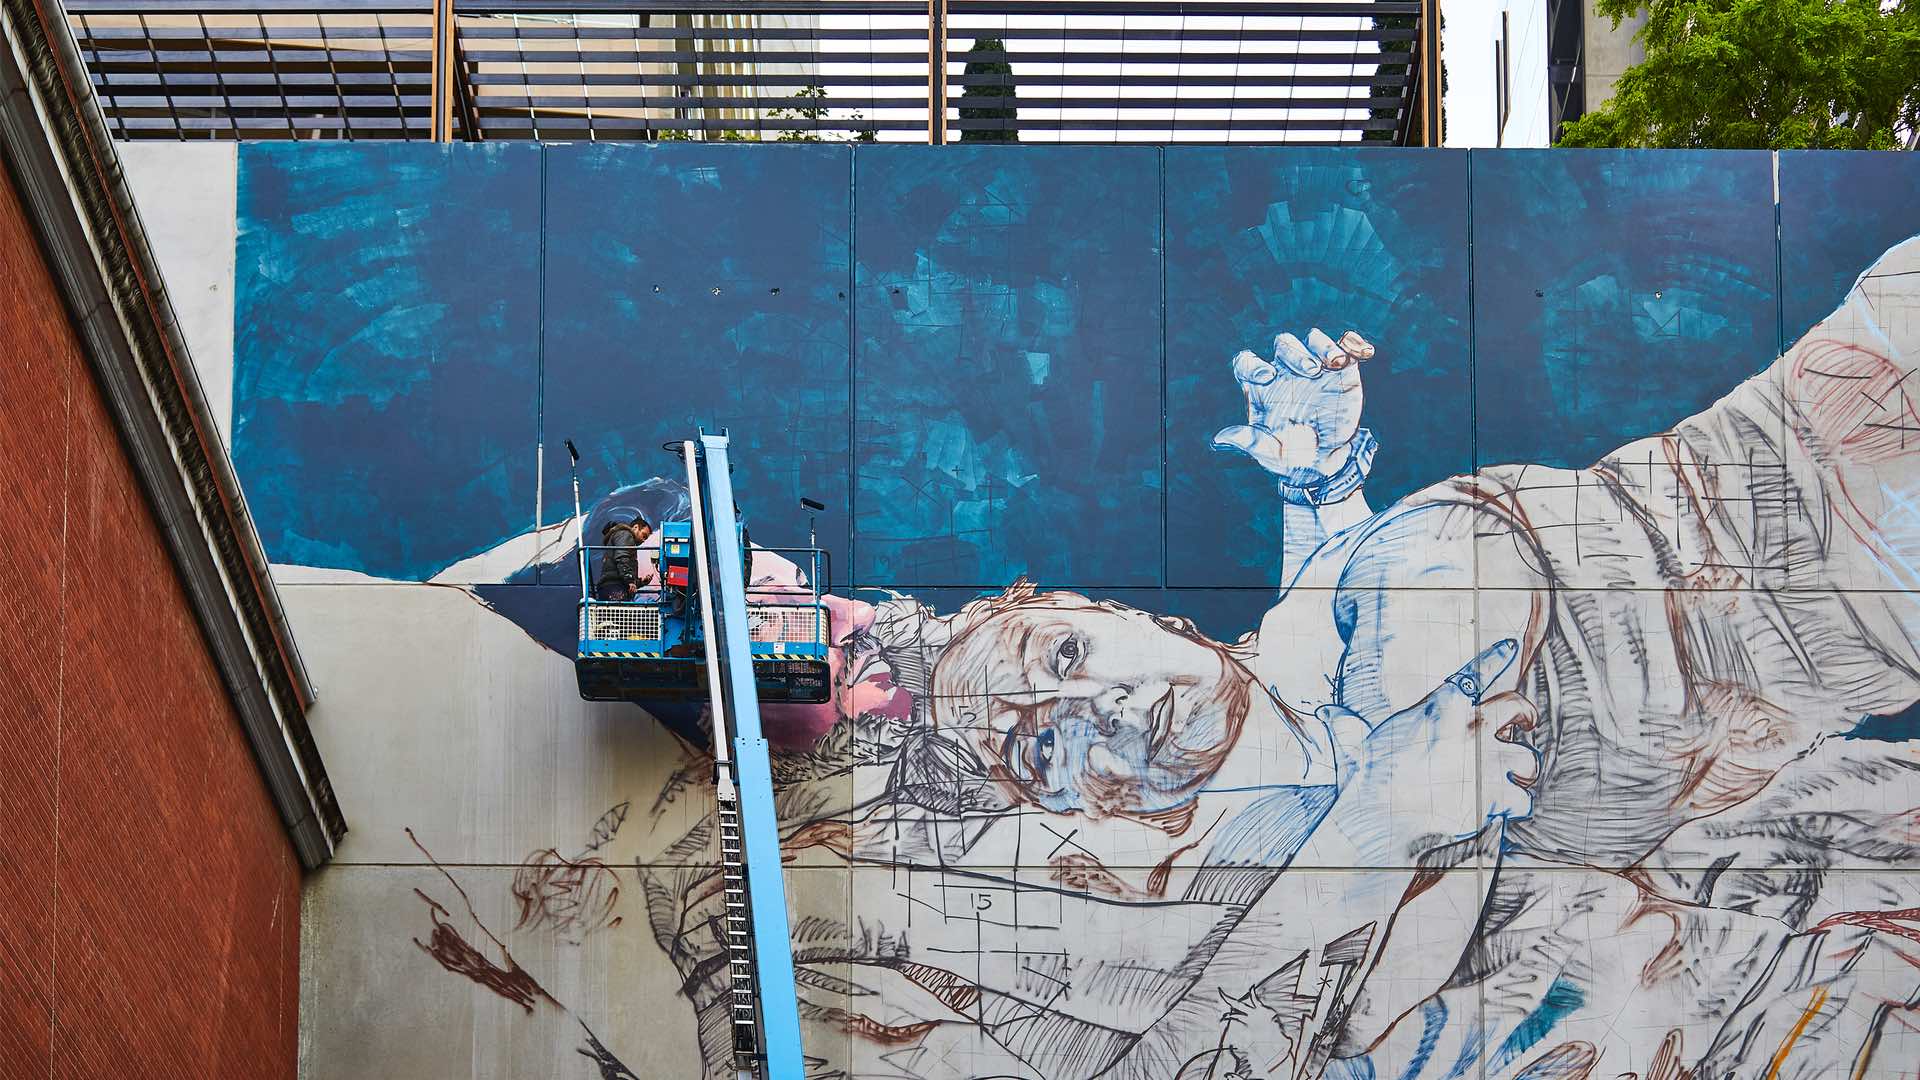 Melbourne Has a New Street Art 'Precinct' with Six New Large-Scale Murals